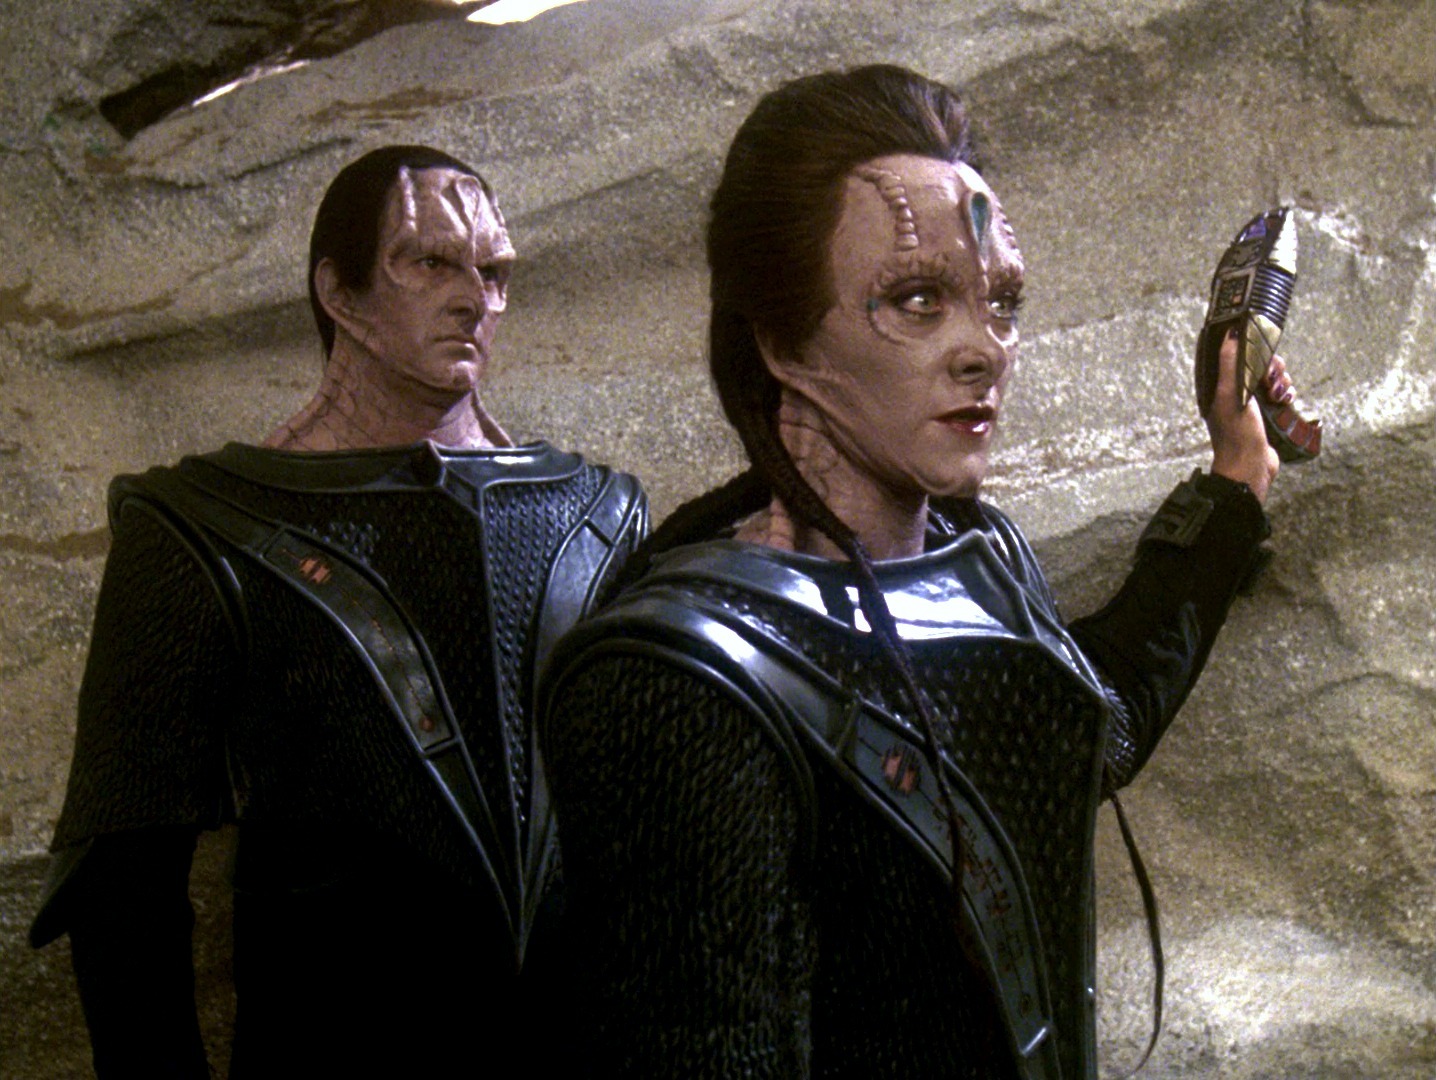 The Klingon, Romulan and Cardassian hand weapons are all seen up close in t...